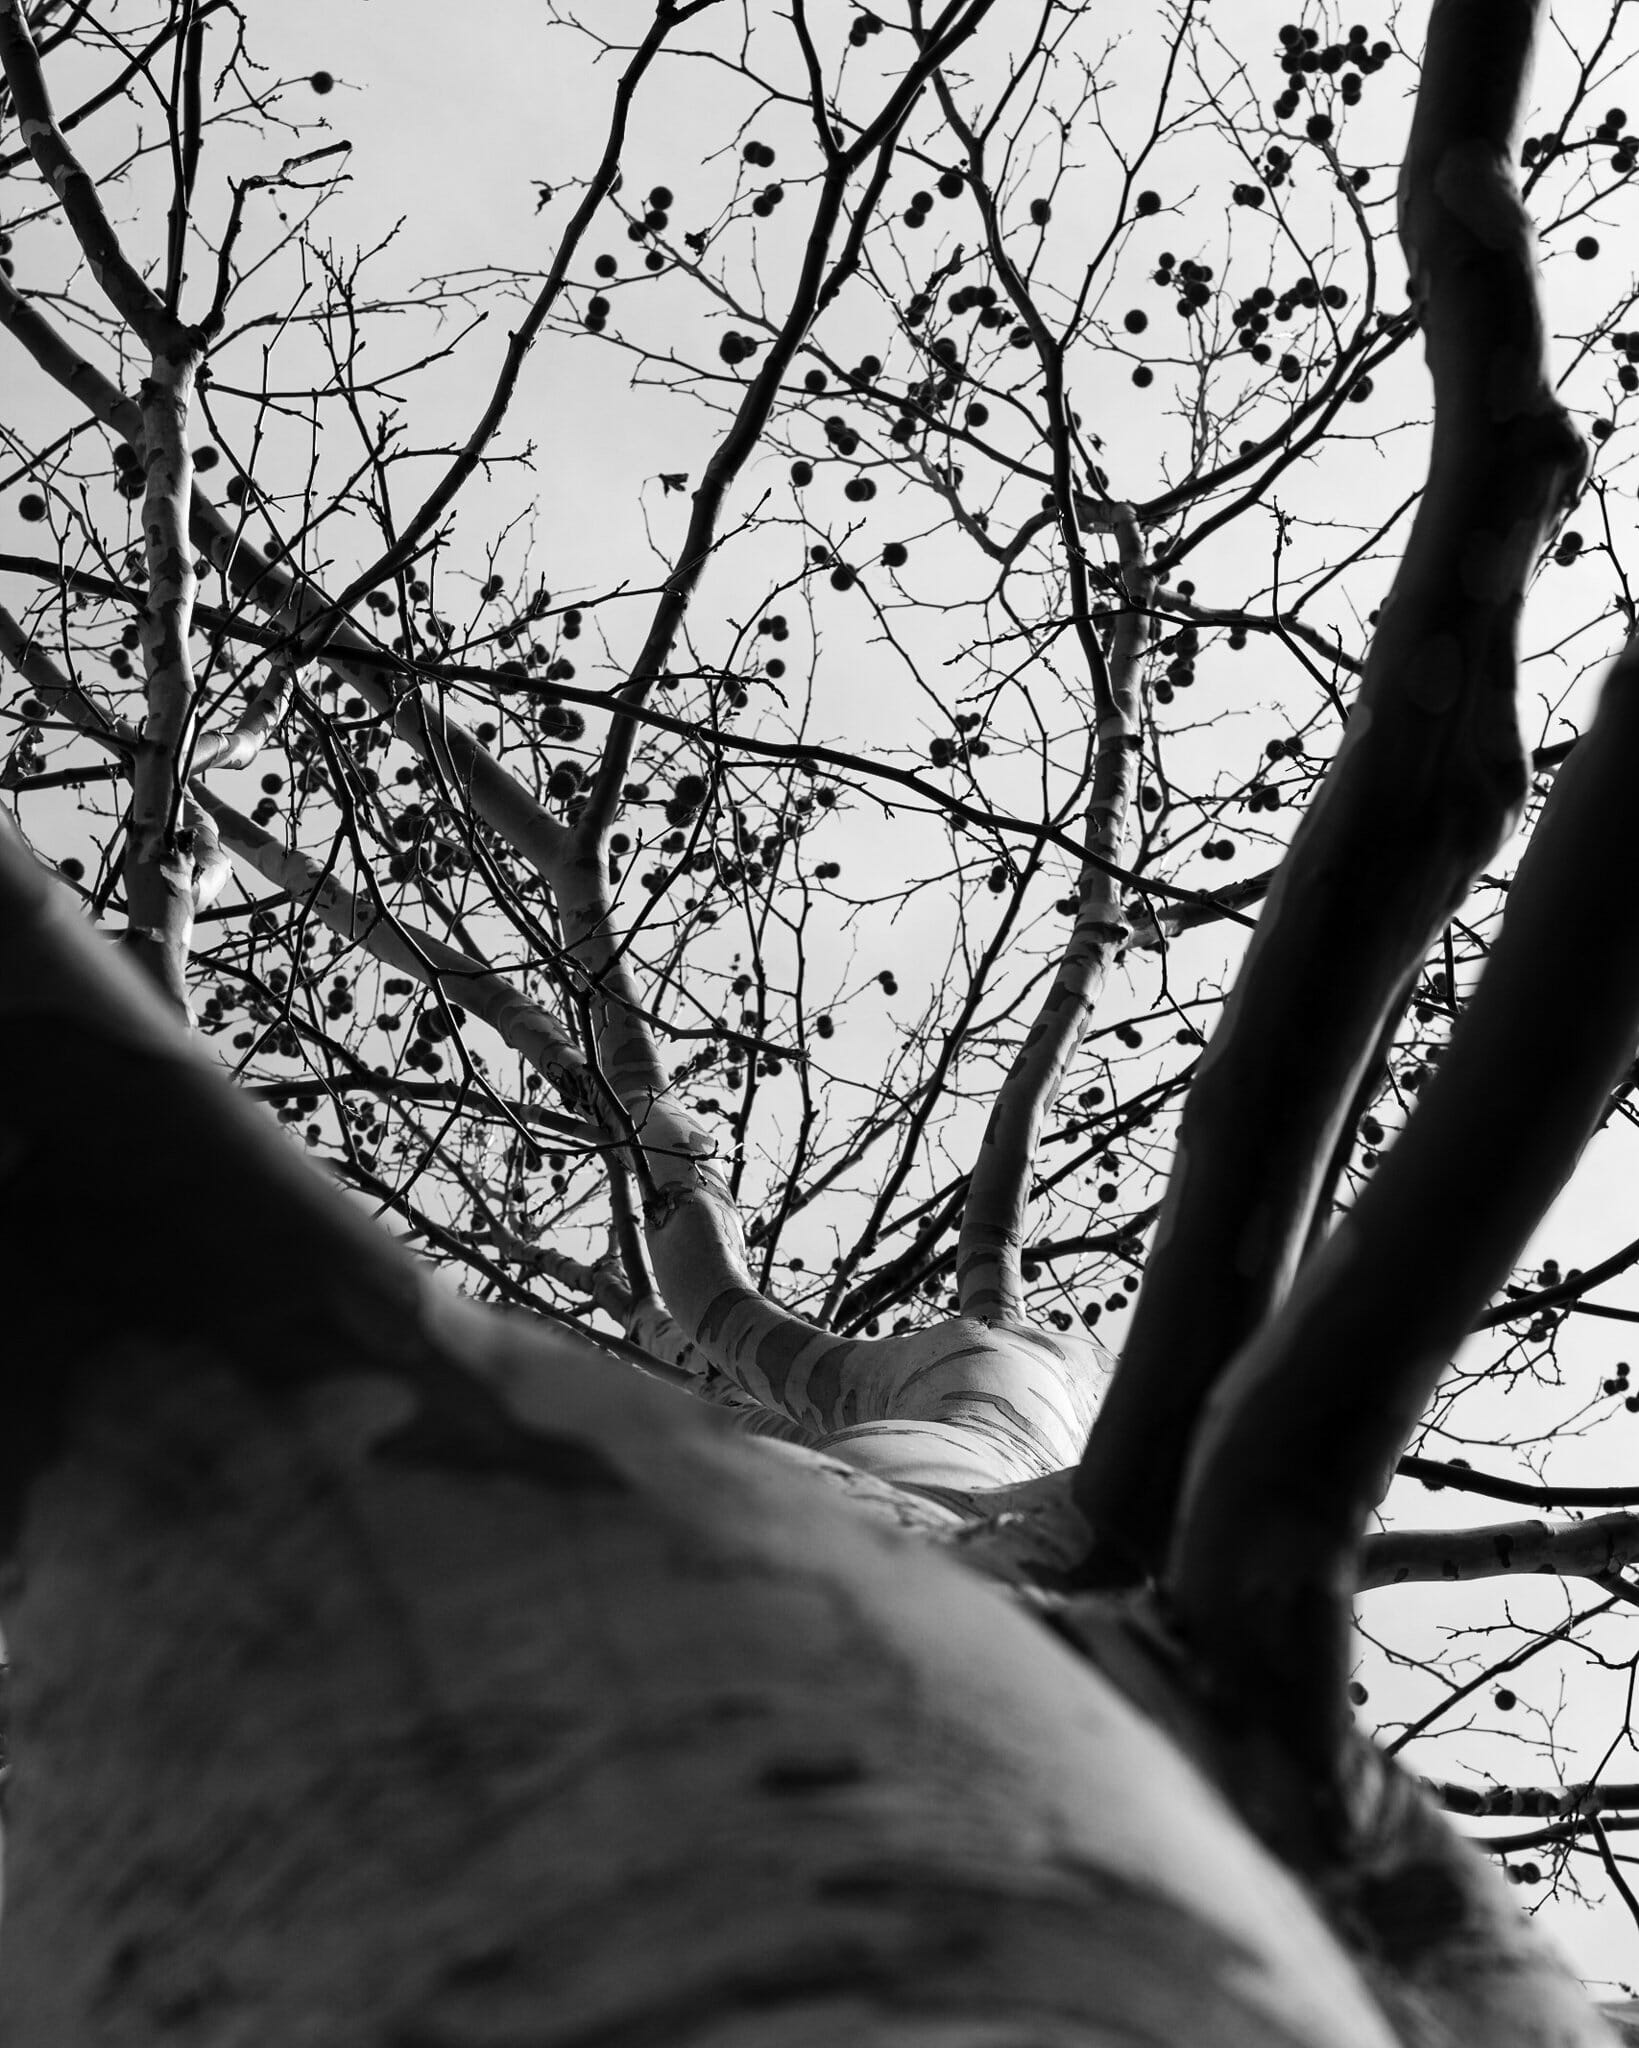 Looking up the trunk of a busy, monochrome plane tree